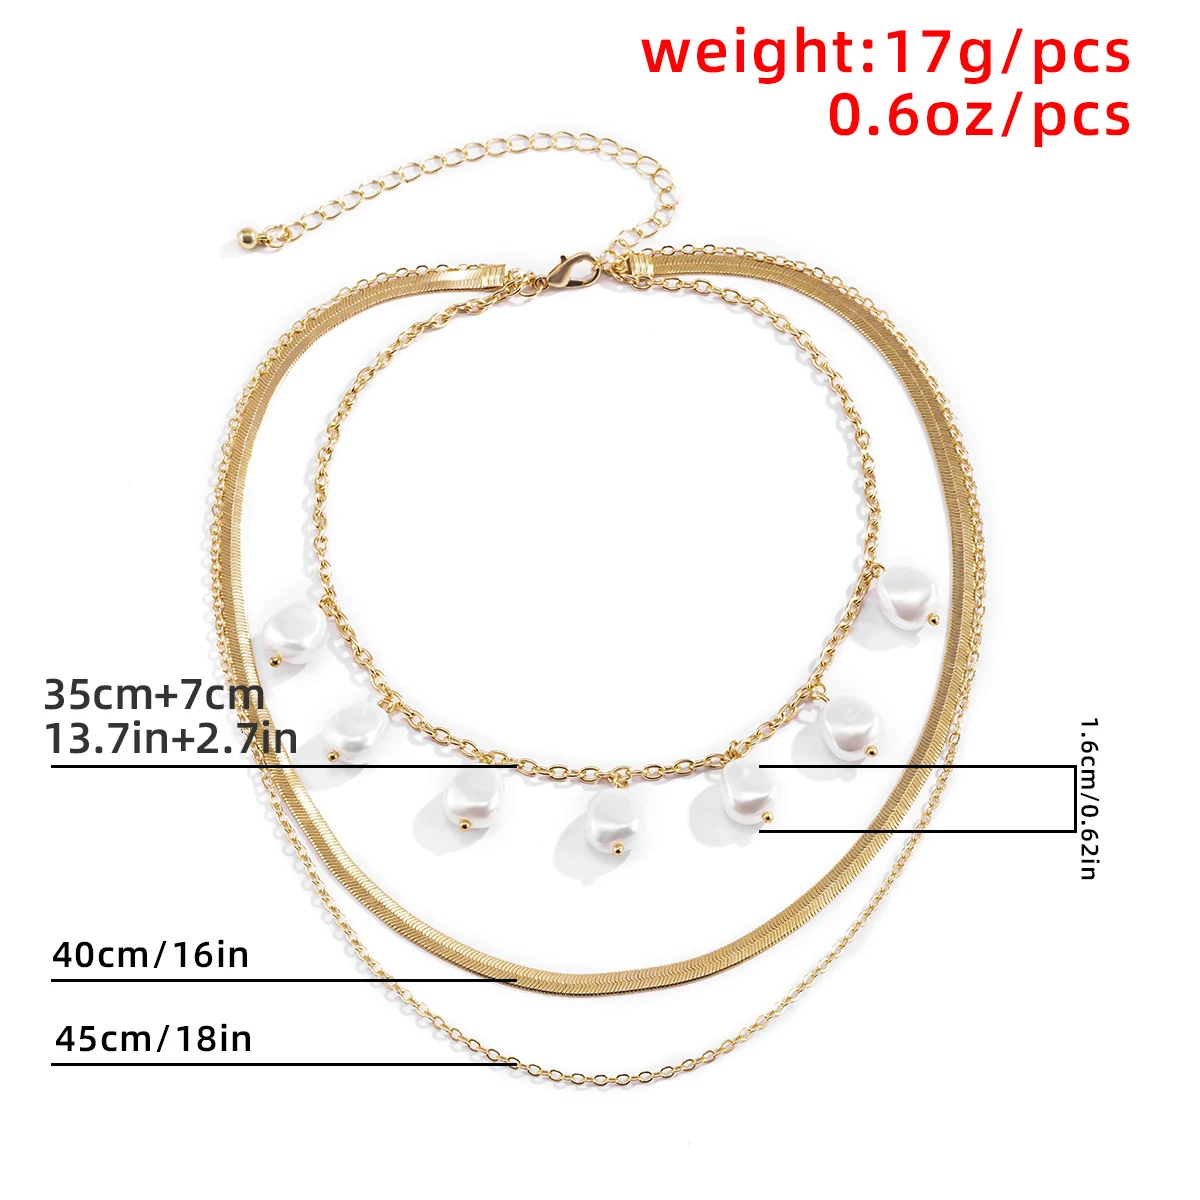 

Baroque Simulated Pearls Pendant Necklace Women Punk Flat Blade Snake Chains Choker Necklaces Fashion Layered Collier Jewelry